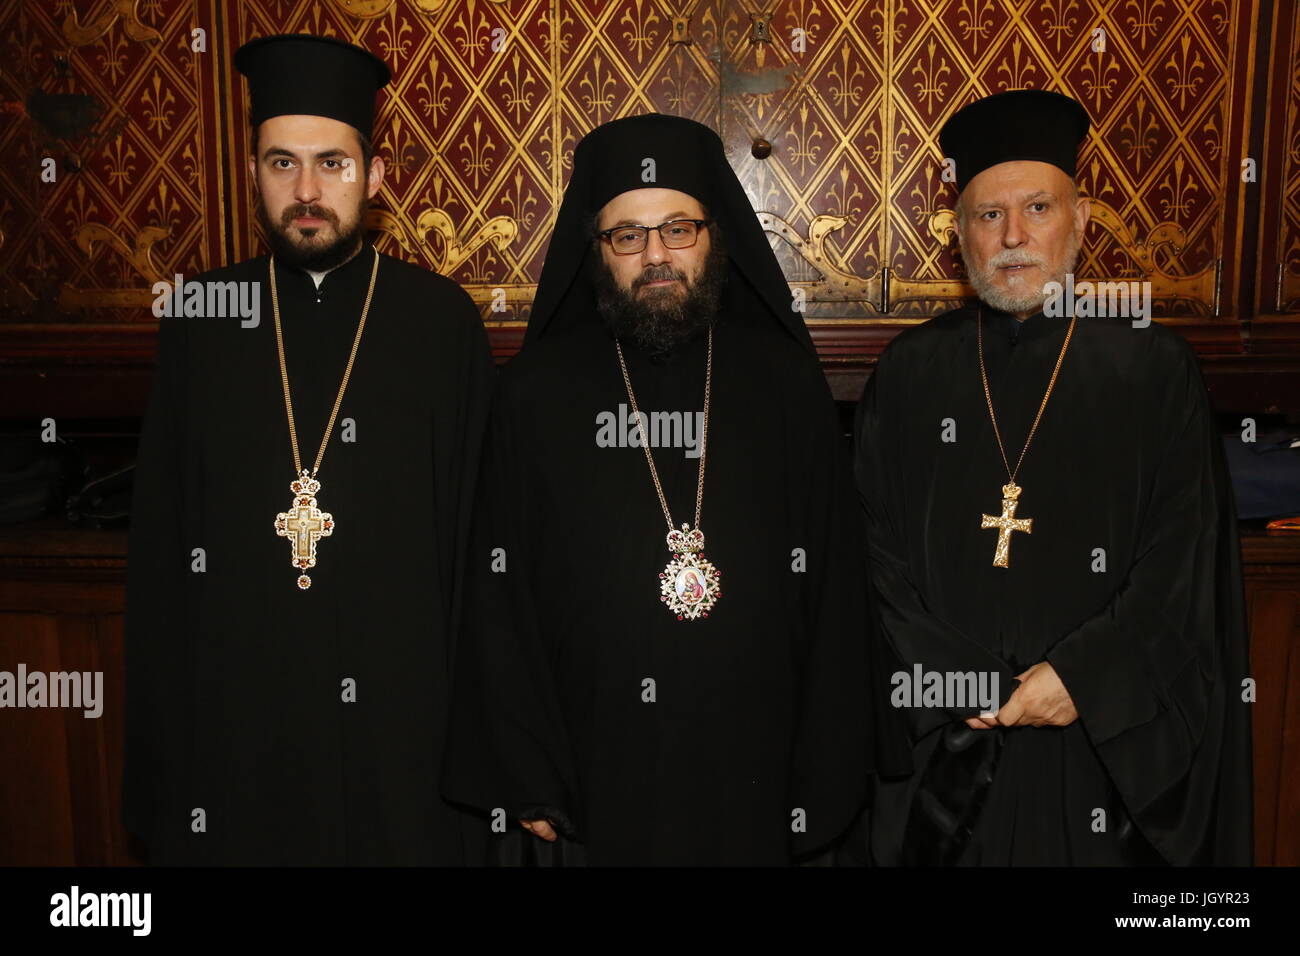 Orthodox clergy in Notre Dame catholic cathedral, Paris. Stock Photo